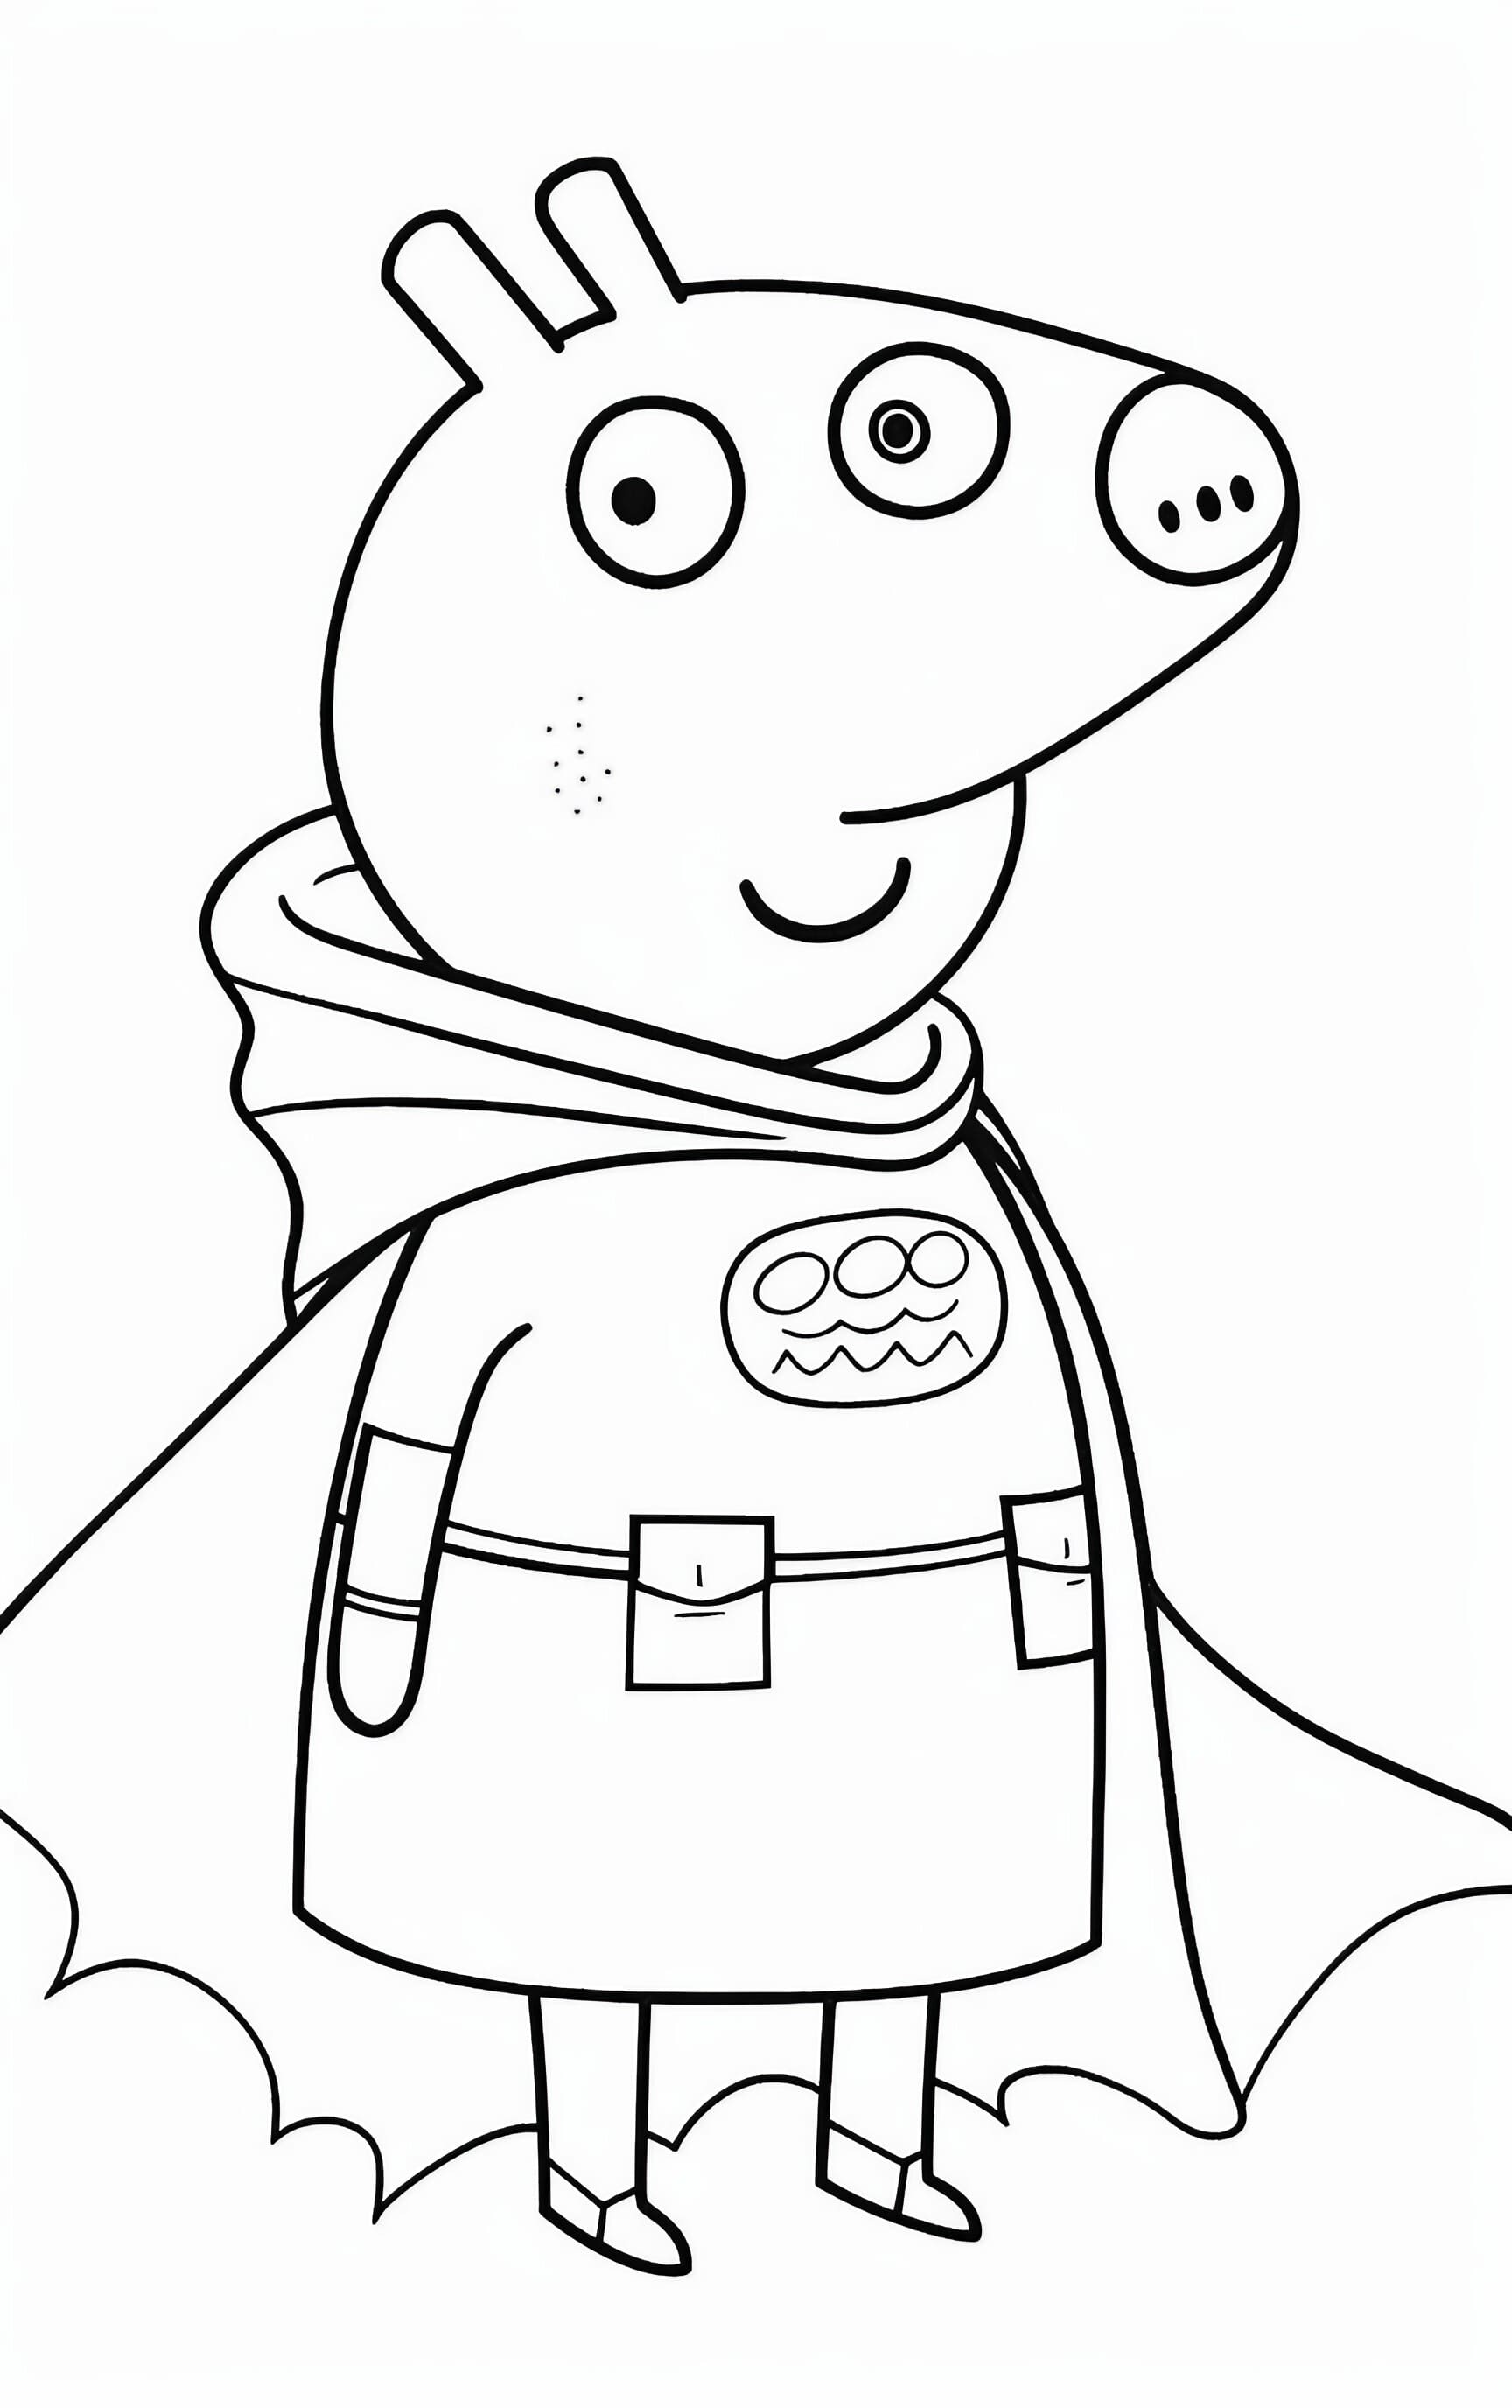 Peppa pig coloring pages for free and printable